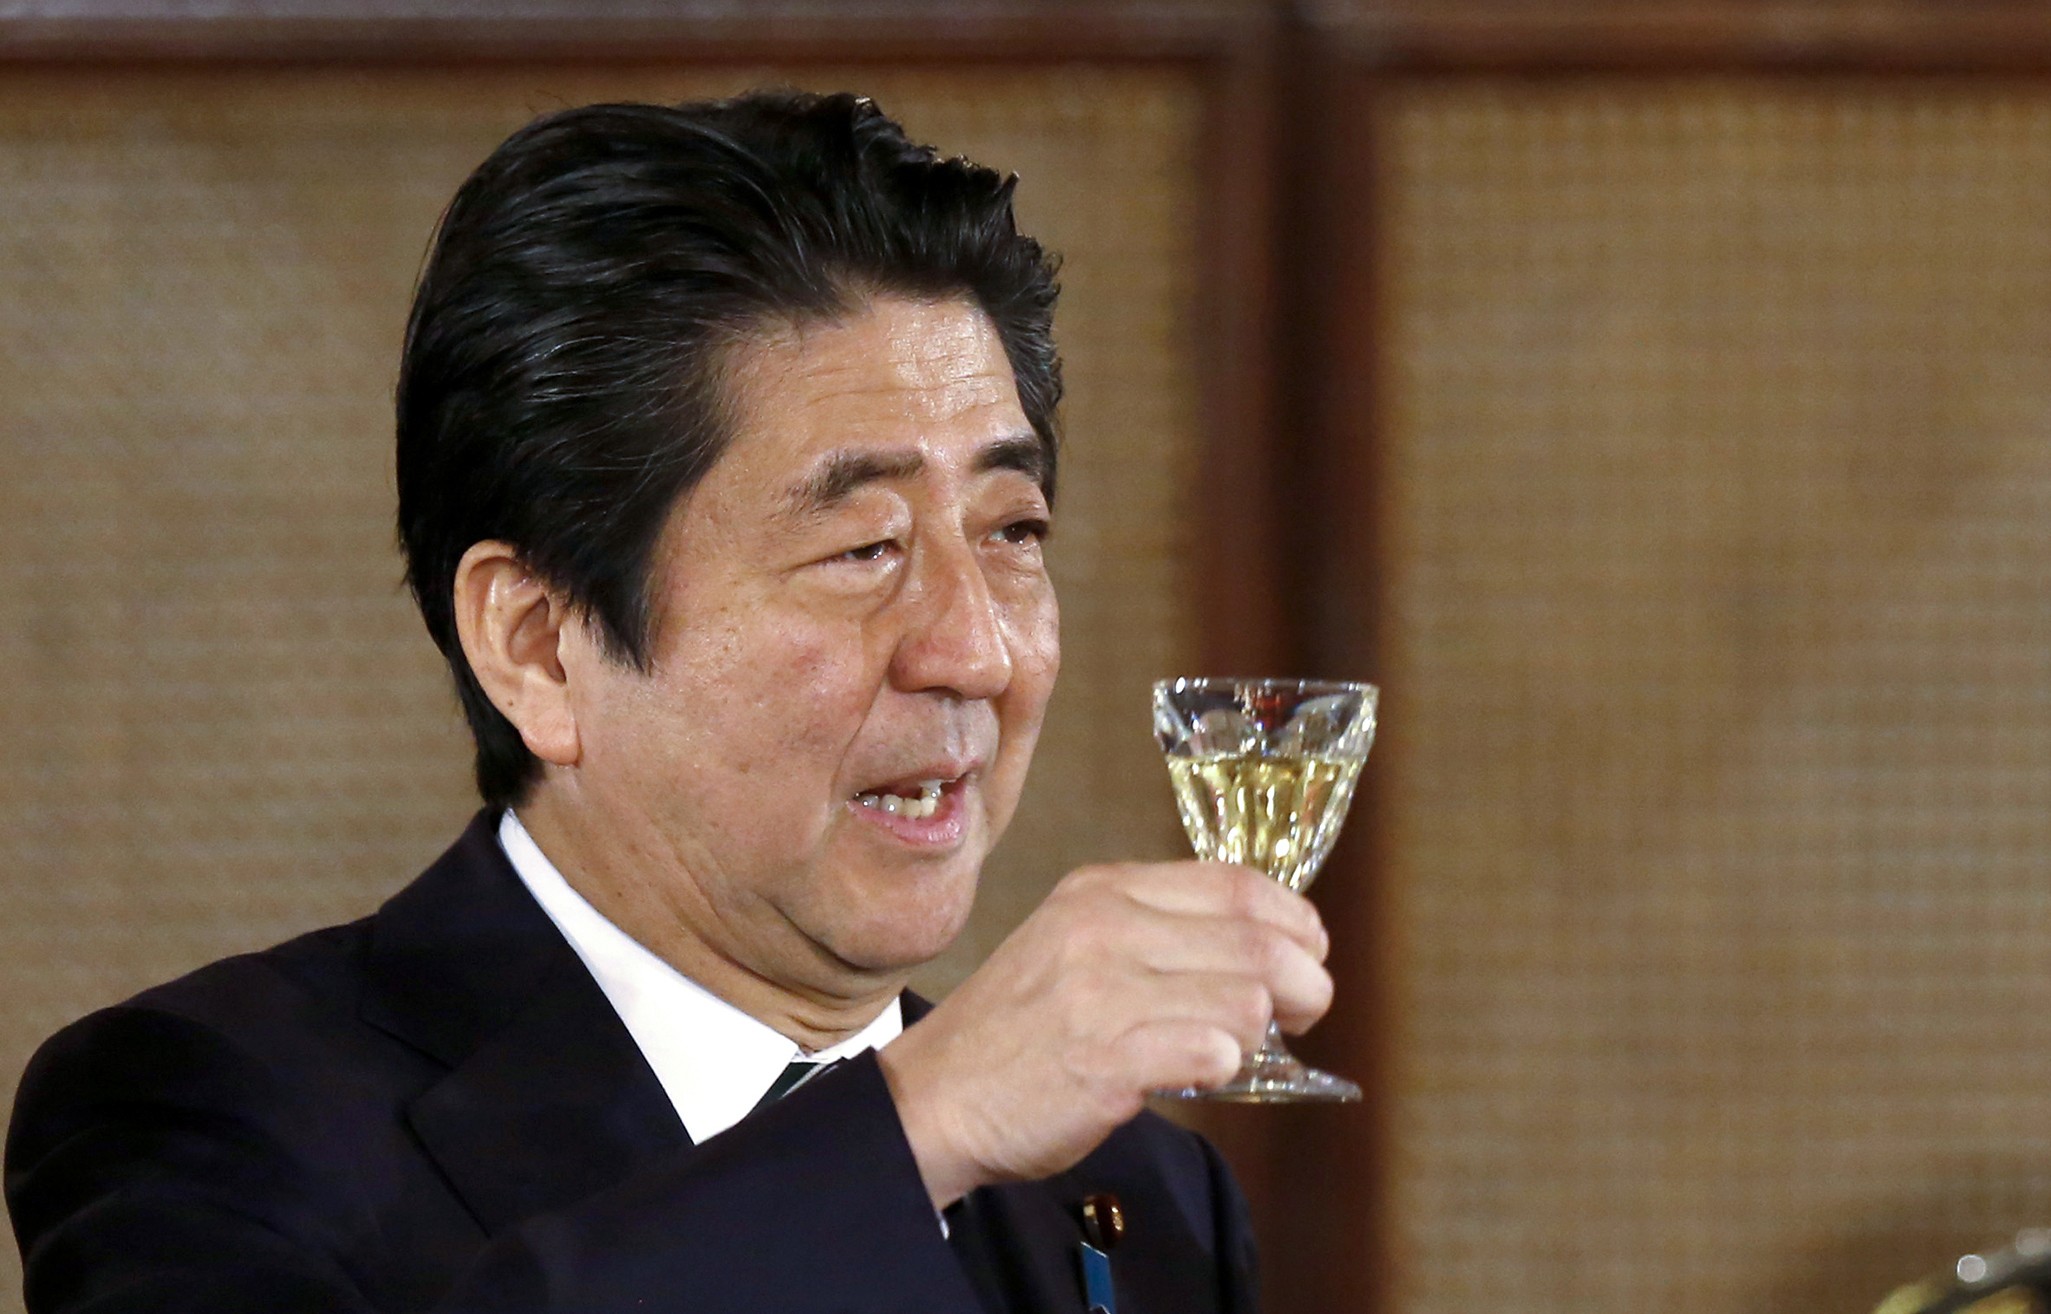 Japanese Prime Minister Shinzo Abe raising a toast during a state dinner at the Malacanang Presidential Palace in Manila on January 12, 2017. Photo: AFP